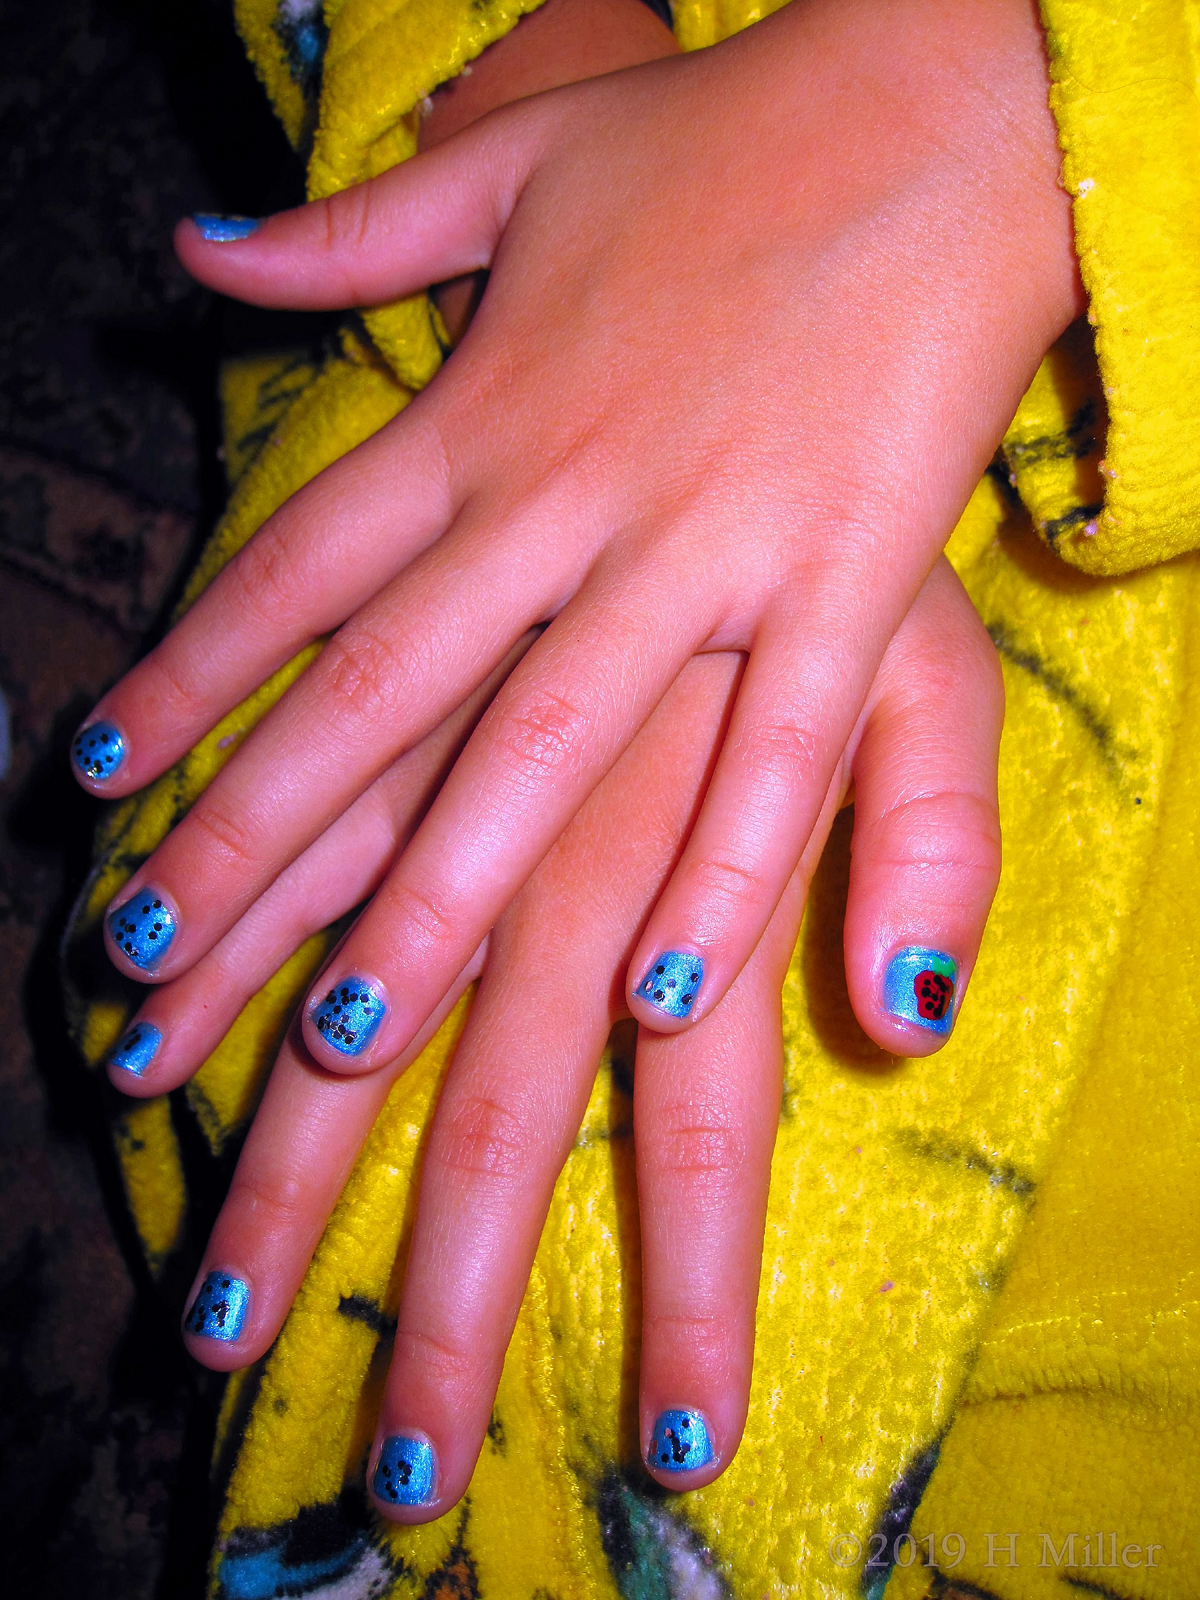 Blue Glitter Polish With Seeds And Strawberries For A Kids Mani With Nail Art!